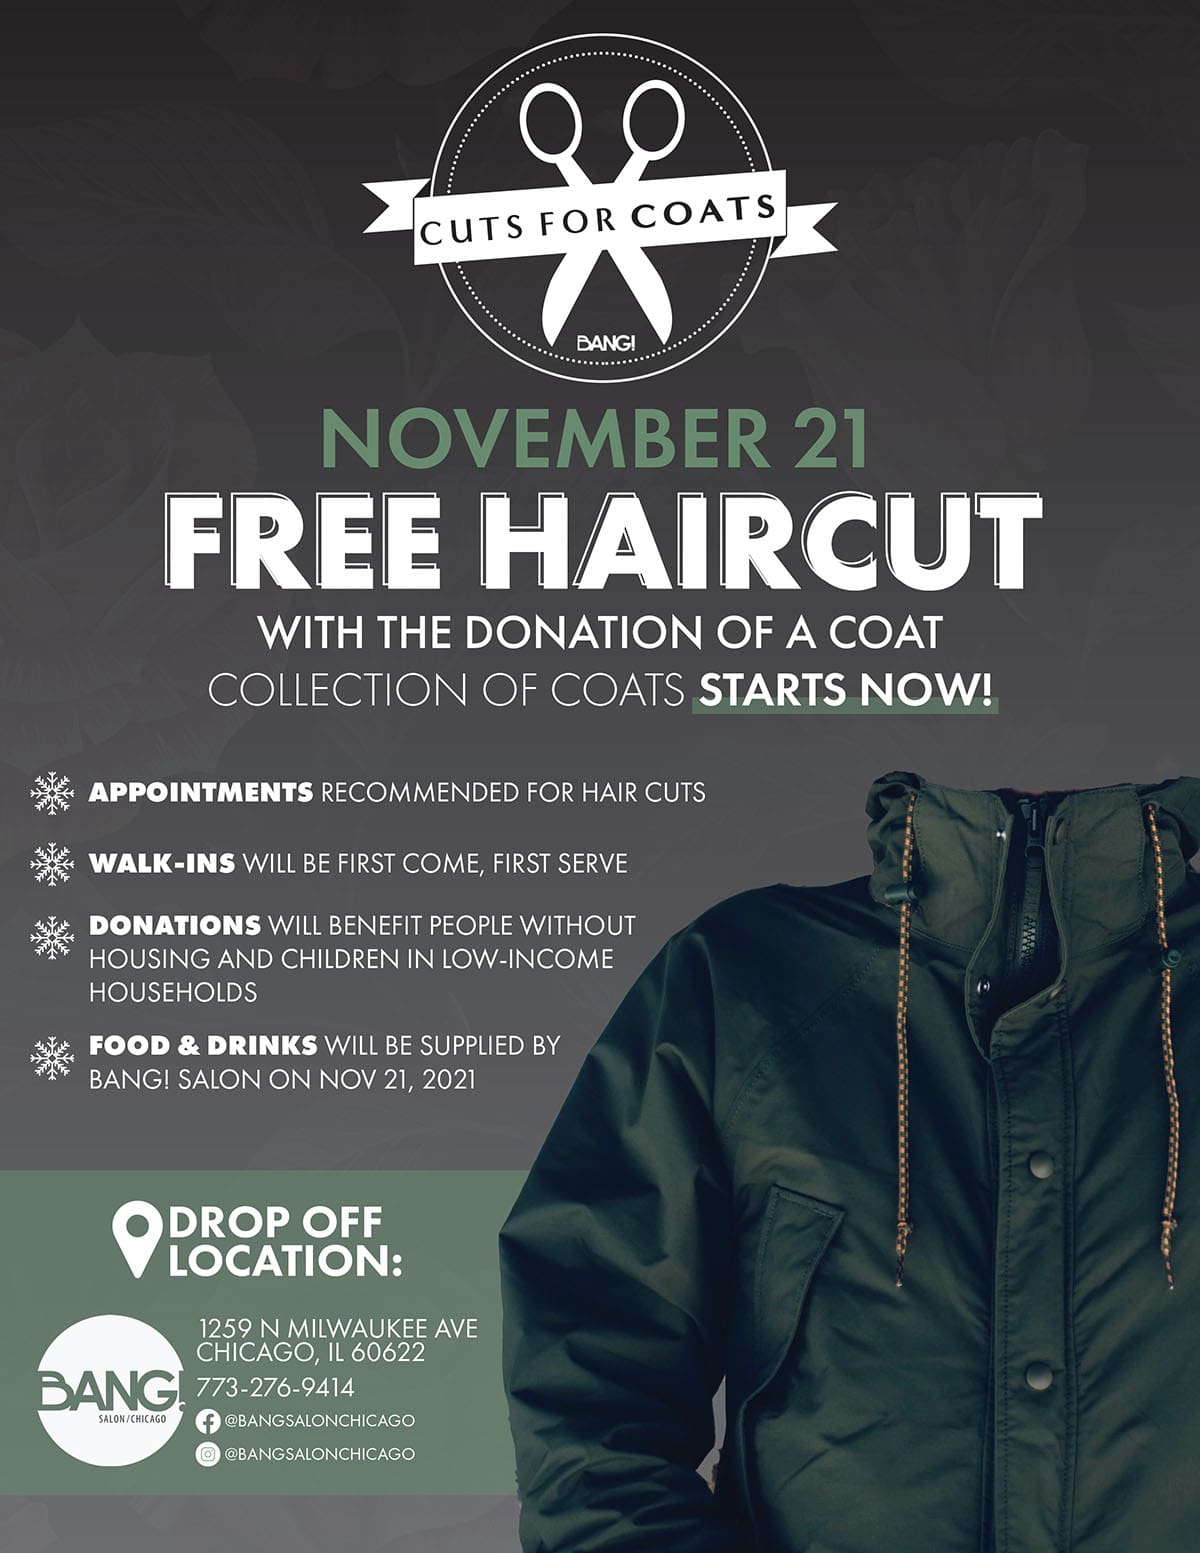 Donate a coat for our annual coat drive and receive a FREE haircut